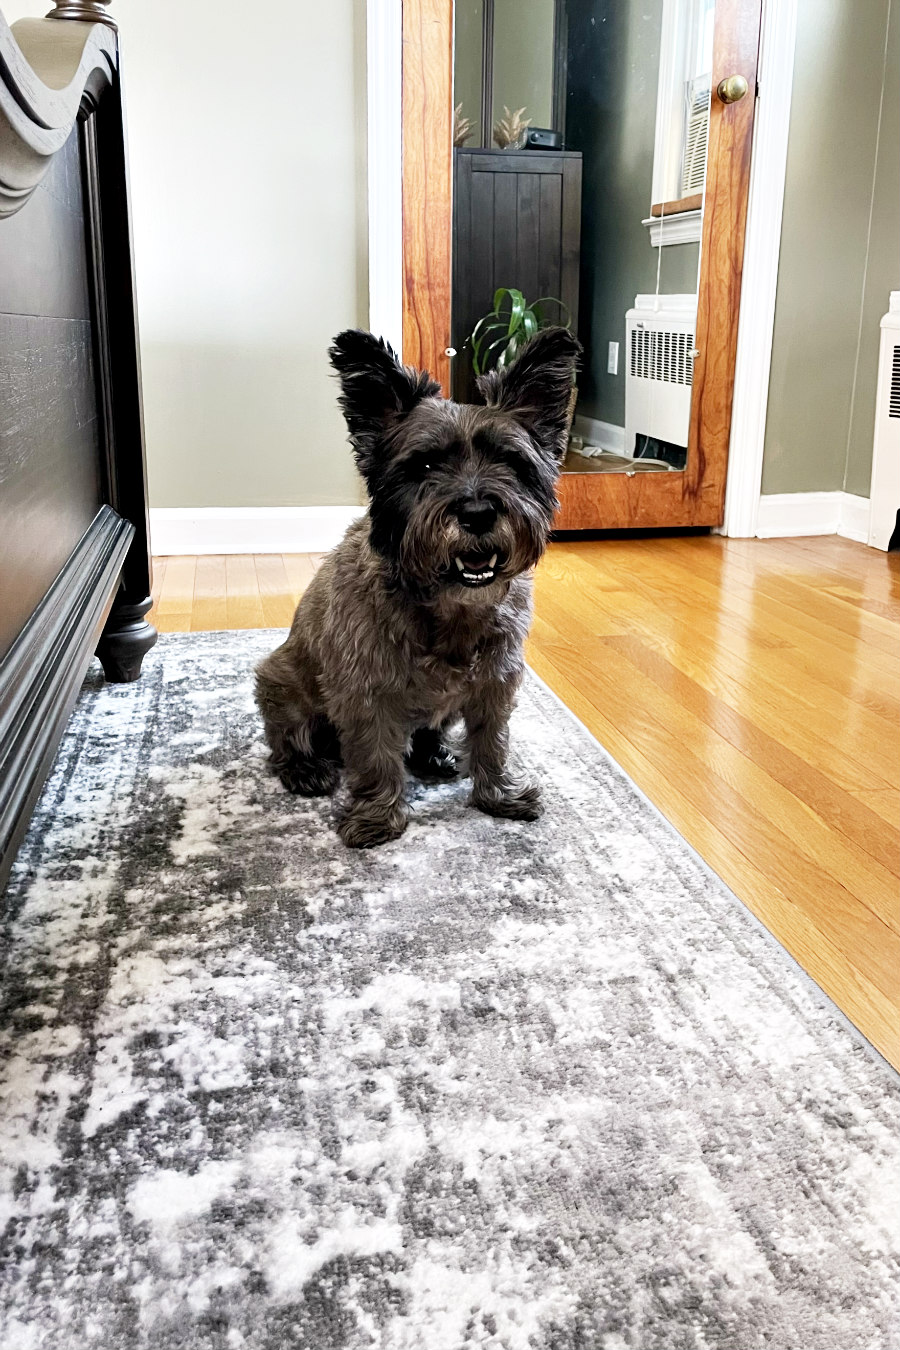 Cairn terrier, Hunter, sits on gray distressed runner rug next to bed.